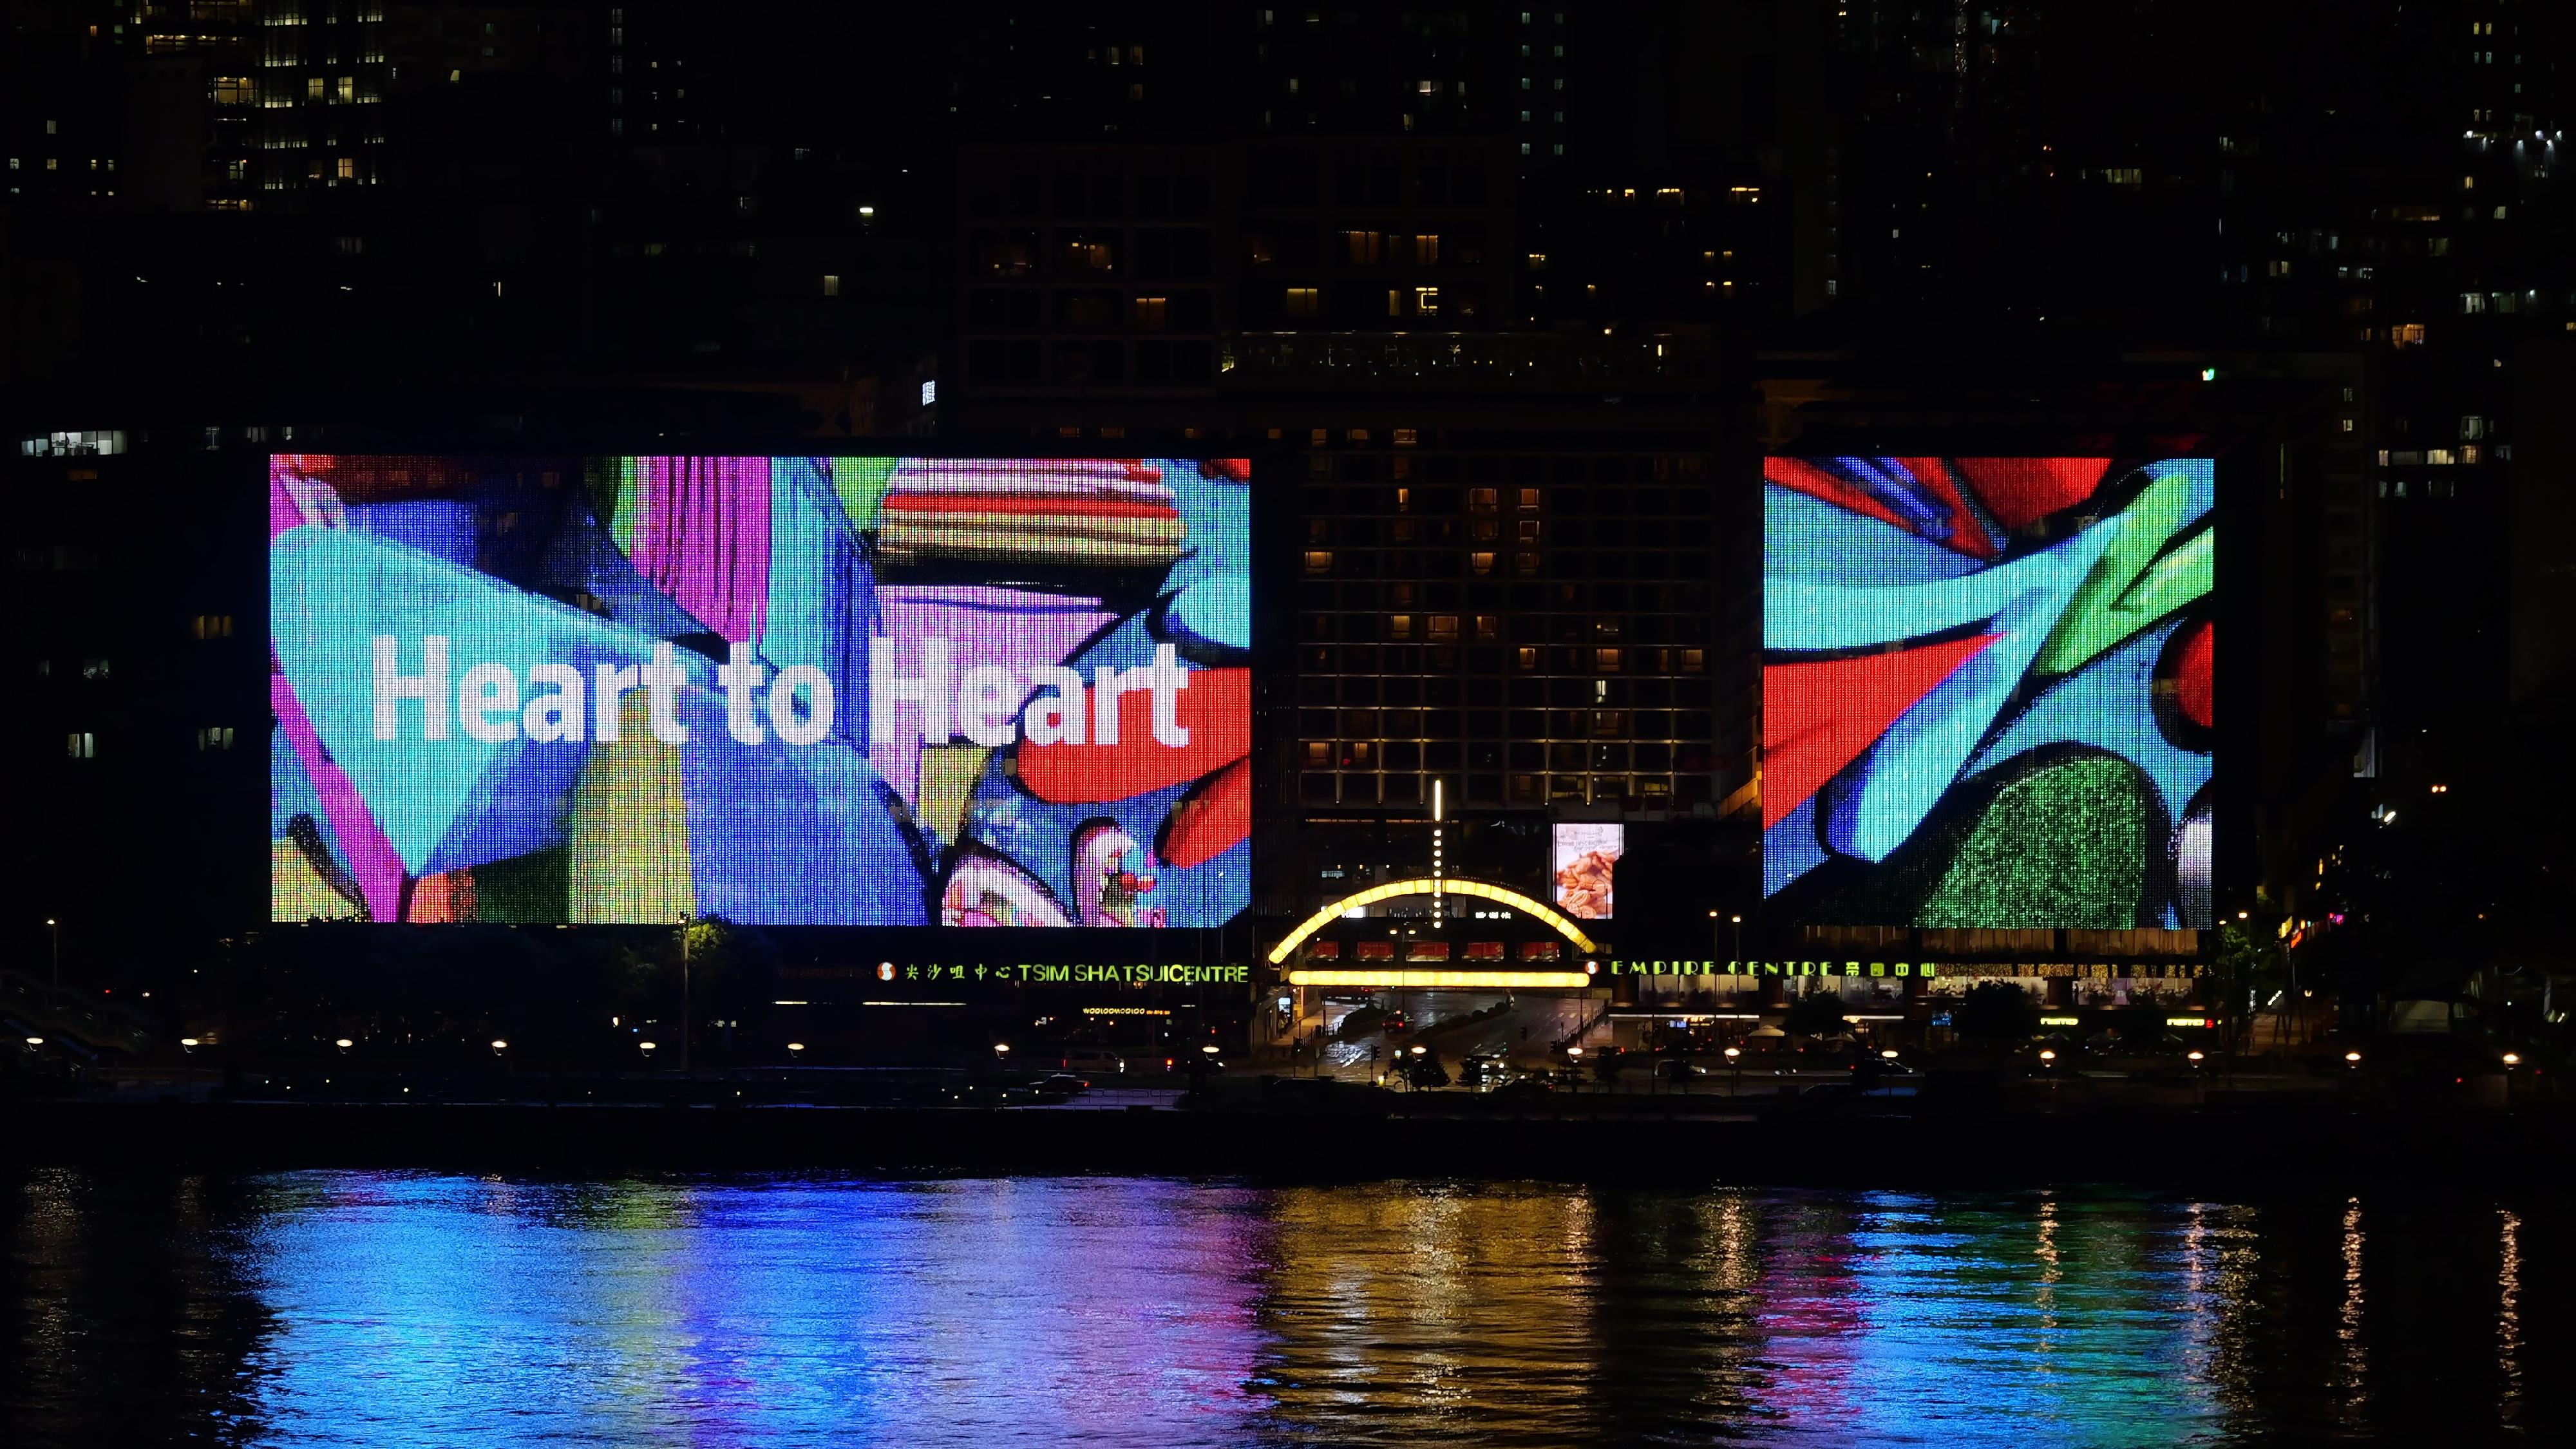 Under the project "Art@Harbour", Sino Group will launch the "Heart to Heart" digital art façades at Tsim Sha Tsui Centre, Empire Centre and China Hong Kong City.